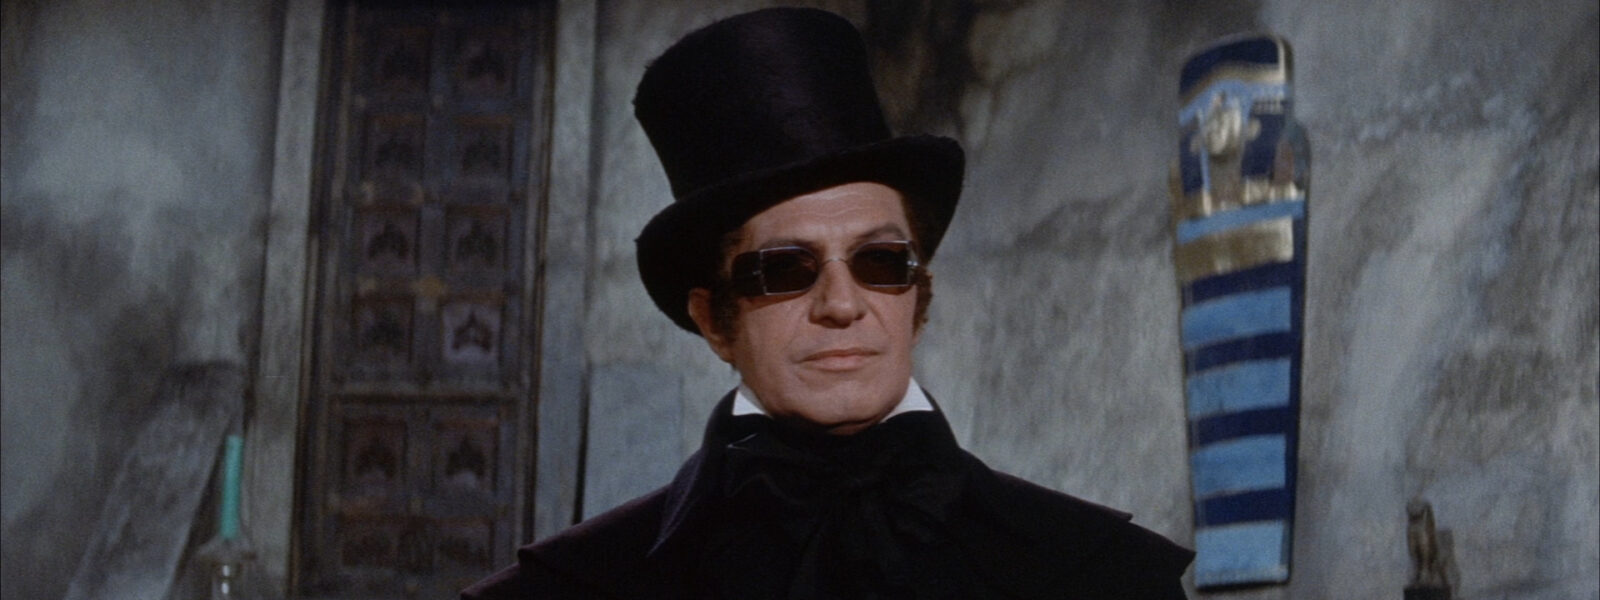 Vincent Price wearing sunglasses and a top hat